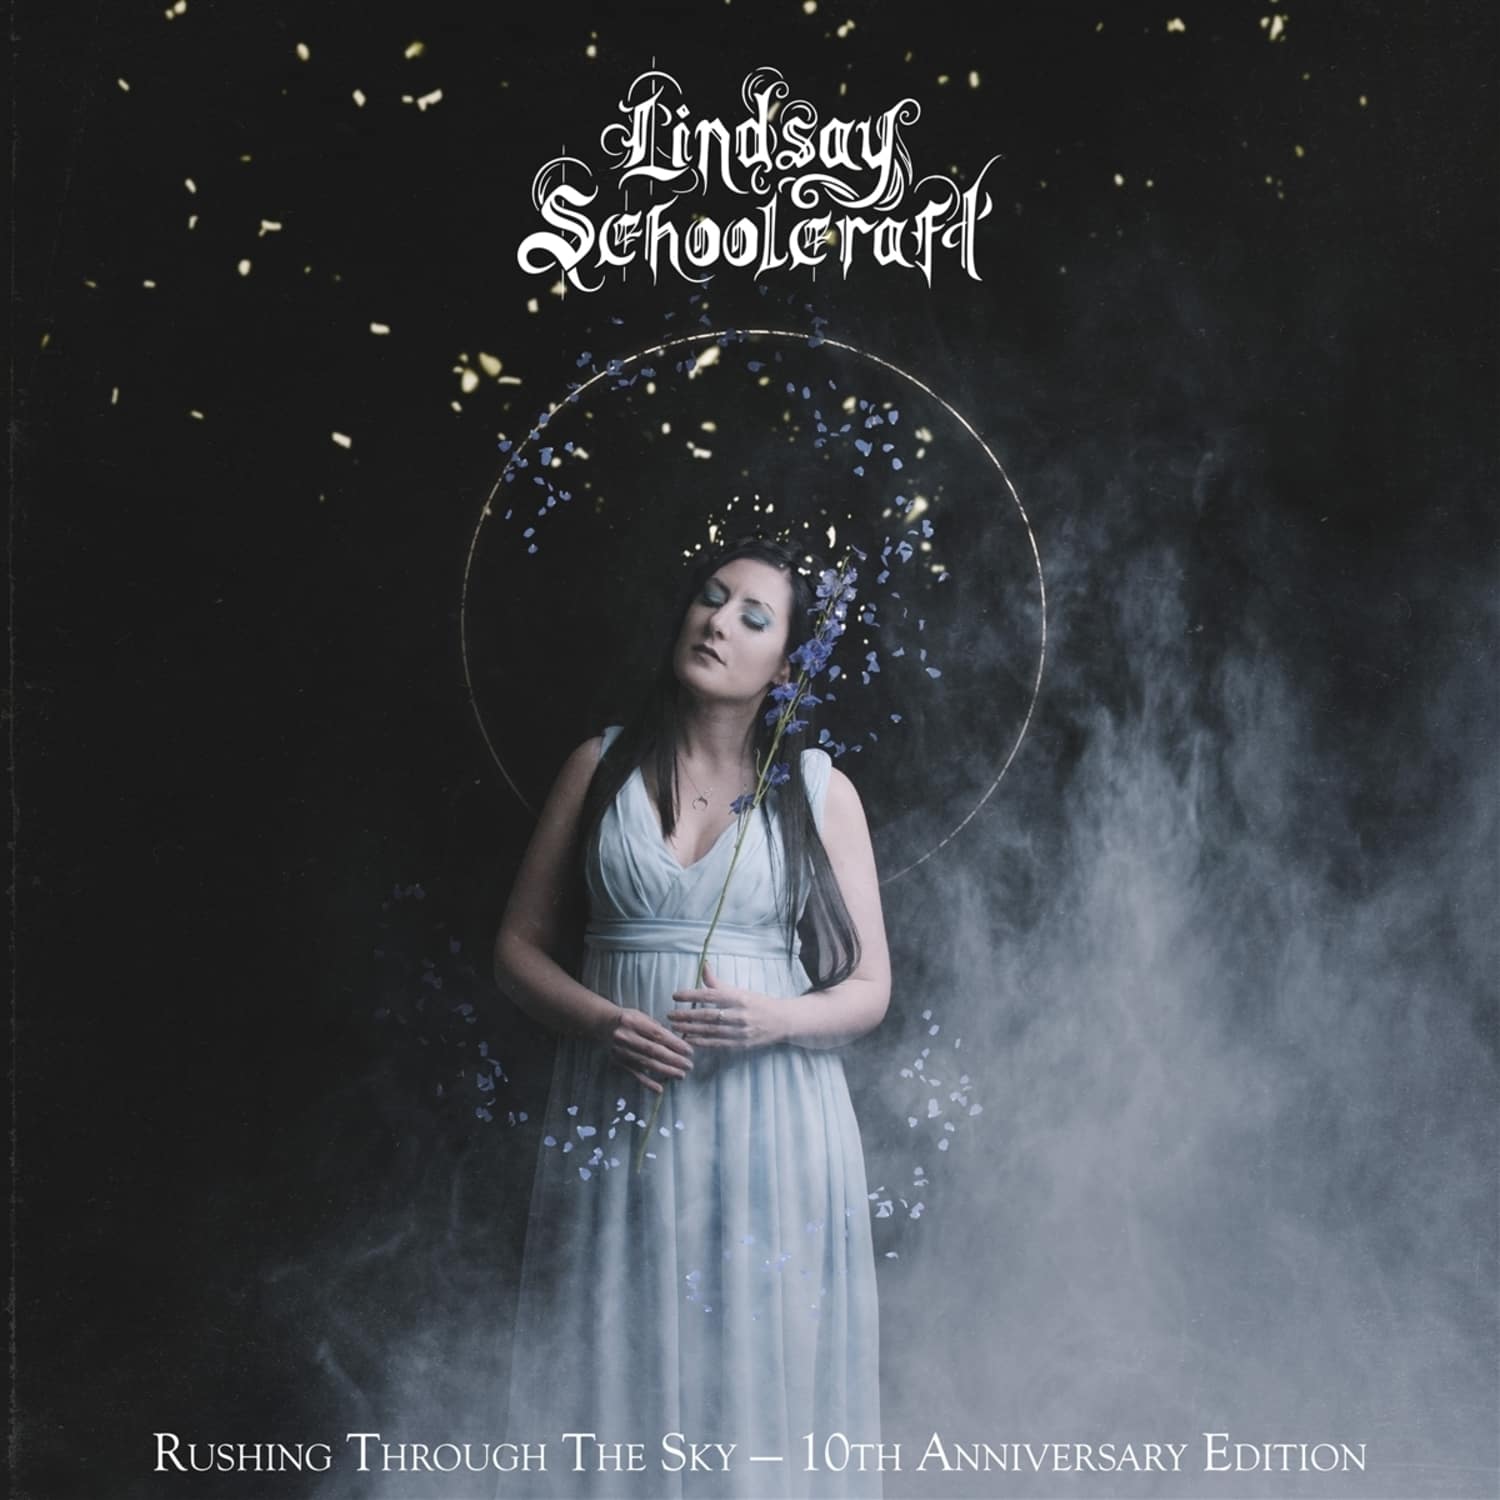 Lindsay Schoolcraft - RUSHING THROUGH THE SKY-10TH ANNIVERSARY EDITION 